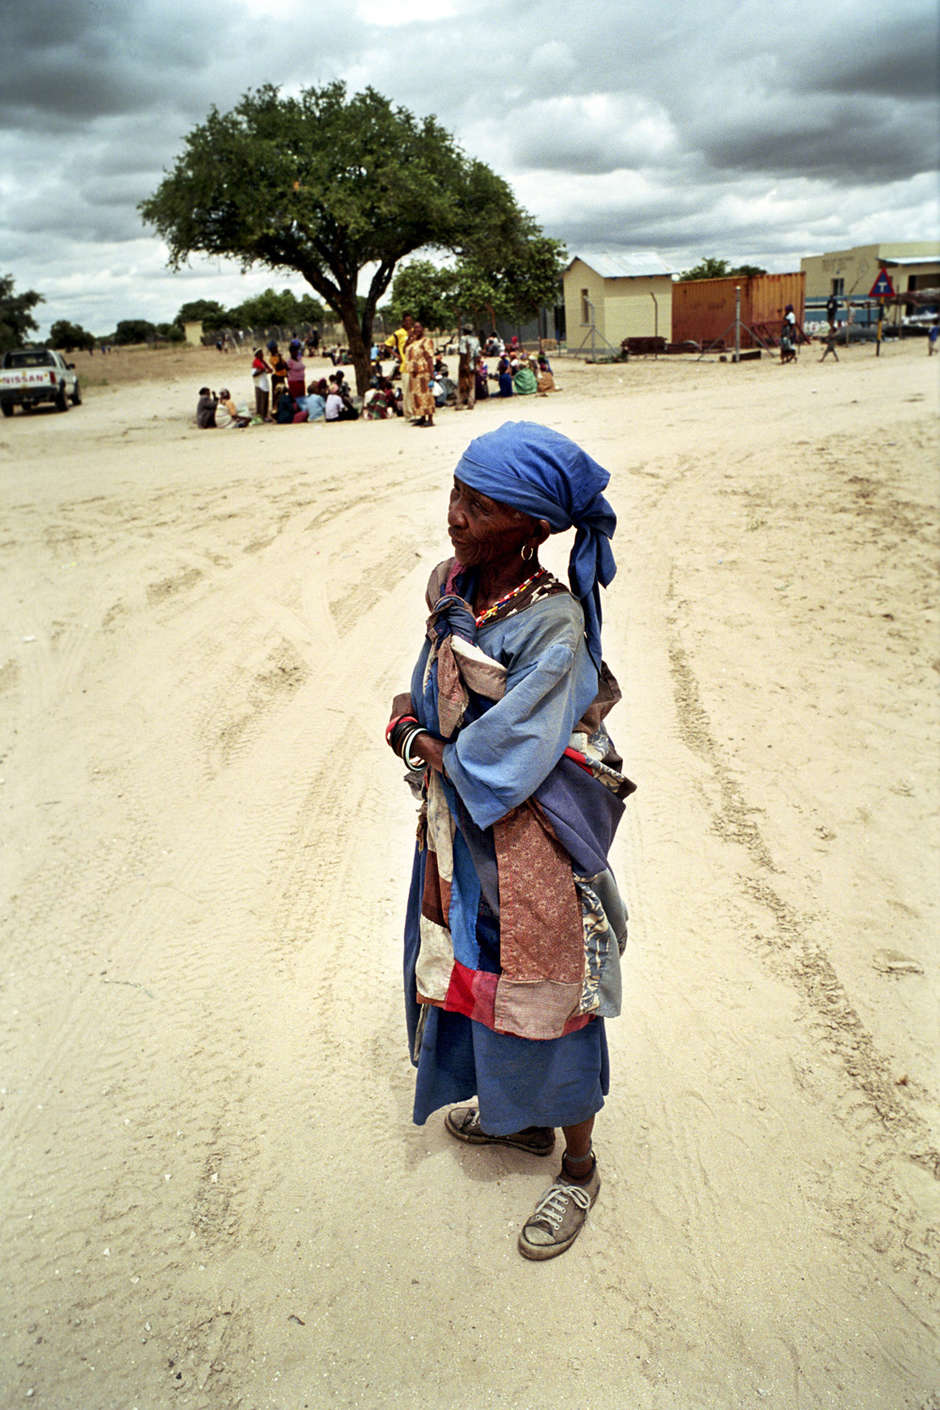 A Bushman woman in the street in New Xade in Botswana, a government eviction camp to which many Bushmen were located prior to 2006. 

During the forced evictions, their traditional homes were pulled down, their school and health posts closed, the well they had used destroyed, and the water drained into the sand.

‘If I went to a Minister and said, ‘move from your land,' he'd think I was mad,’’ said a Bushman.

Yet this is what happened to the peoples who once lived from the Zambezi Basin to the Cape.

The Botswana government claim that the Bushmen need to leave behind what they assert is a miserable life 'among the animals,' in order to 'catch up' with the development of the rest of the country.  They have also argued that the Bushmen's presence in the reserve is not compatible with preserving wildlife.

‘They should be elevated from the status where they find themselves,’ said the Foreign Minister of ‘We would all be concerned that any tribe should remain in the bush communing with flora and fauna.’

Botswana’s former President, Festus Mogae, asked, ‘How can you have a stone-age creature continue to exist in the age of computers?’